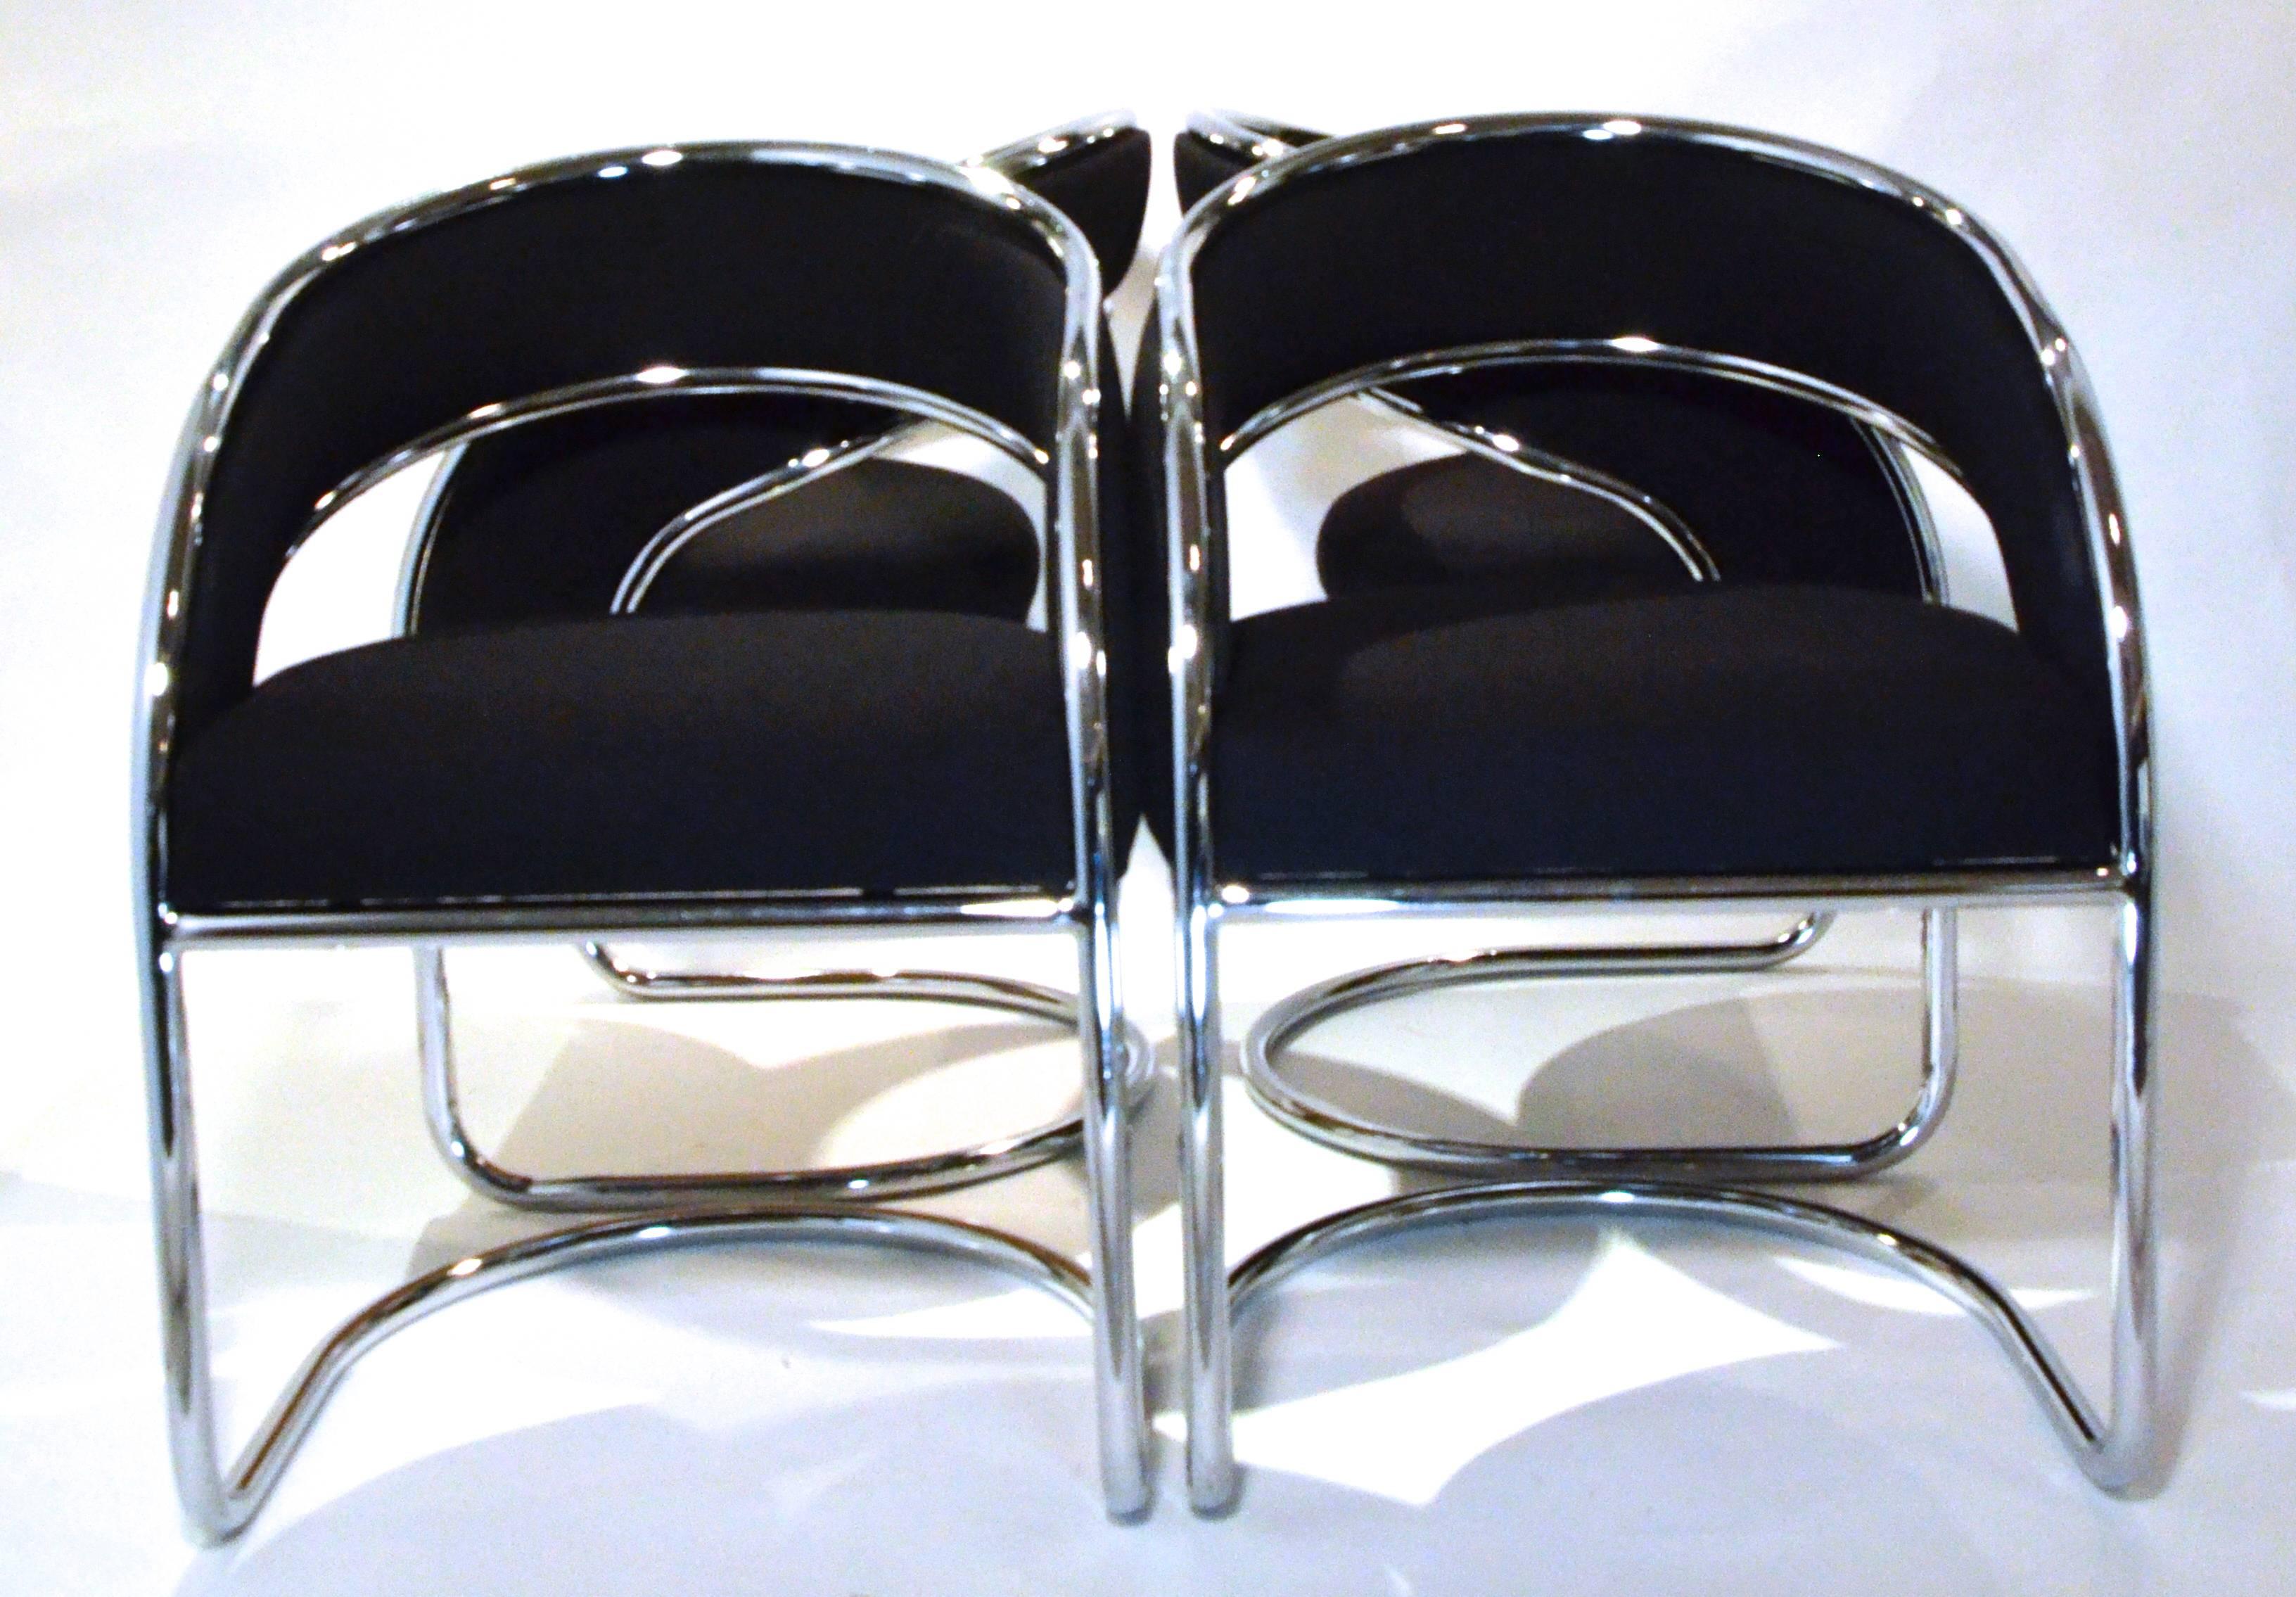 Offered is a unique set of four chrome and wool felt dining chairs armchairs by Contemporary Shells Inc. Contemporary Shell Inc. was based in Hempstead NY and produced works for many designers including Arthur Umanoff. This set was designed in the